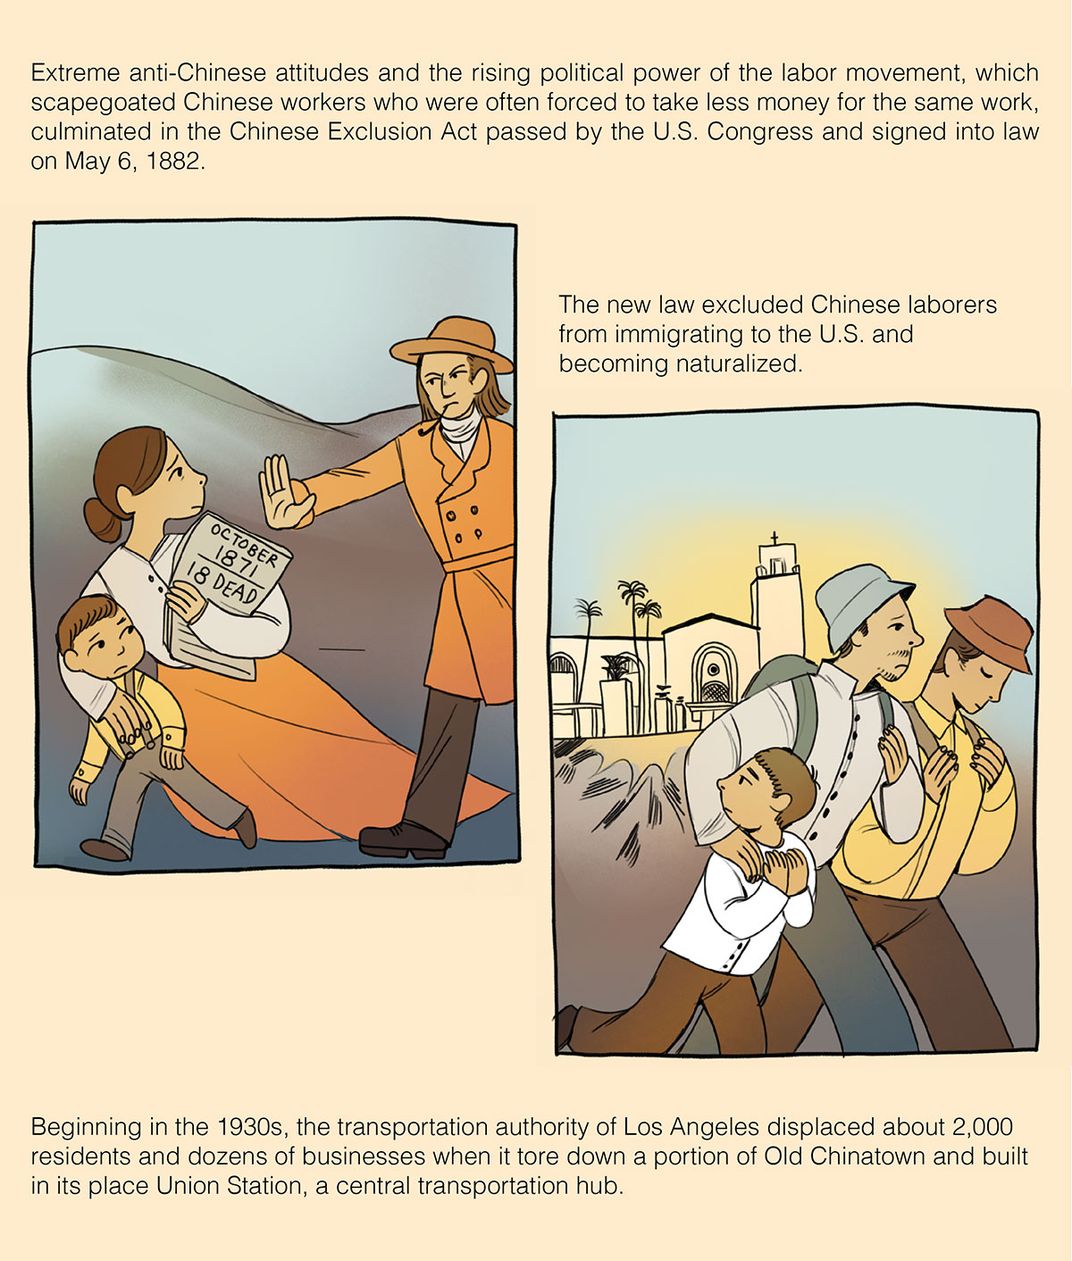 Illustrated comic page. Text: Extreme anti-Chinese attitudes and the rising political power of the labor movement, which scapegoated Chinese workers who were often forced to take less money for the same work, culminated in the Chinese Exclusion Act.